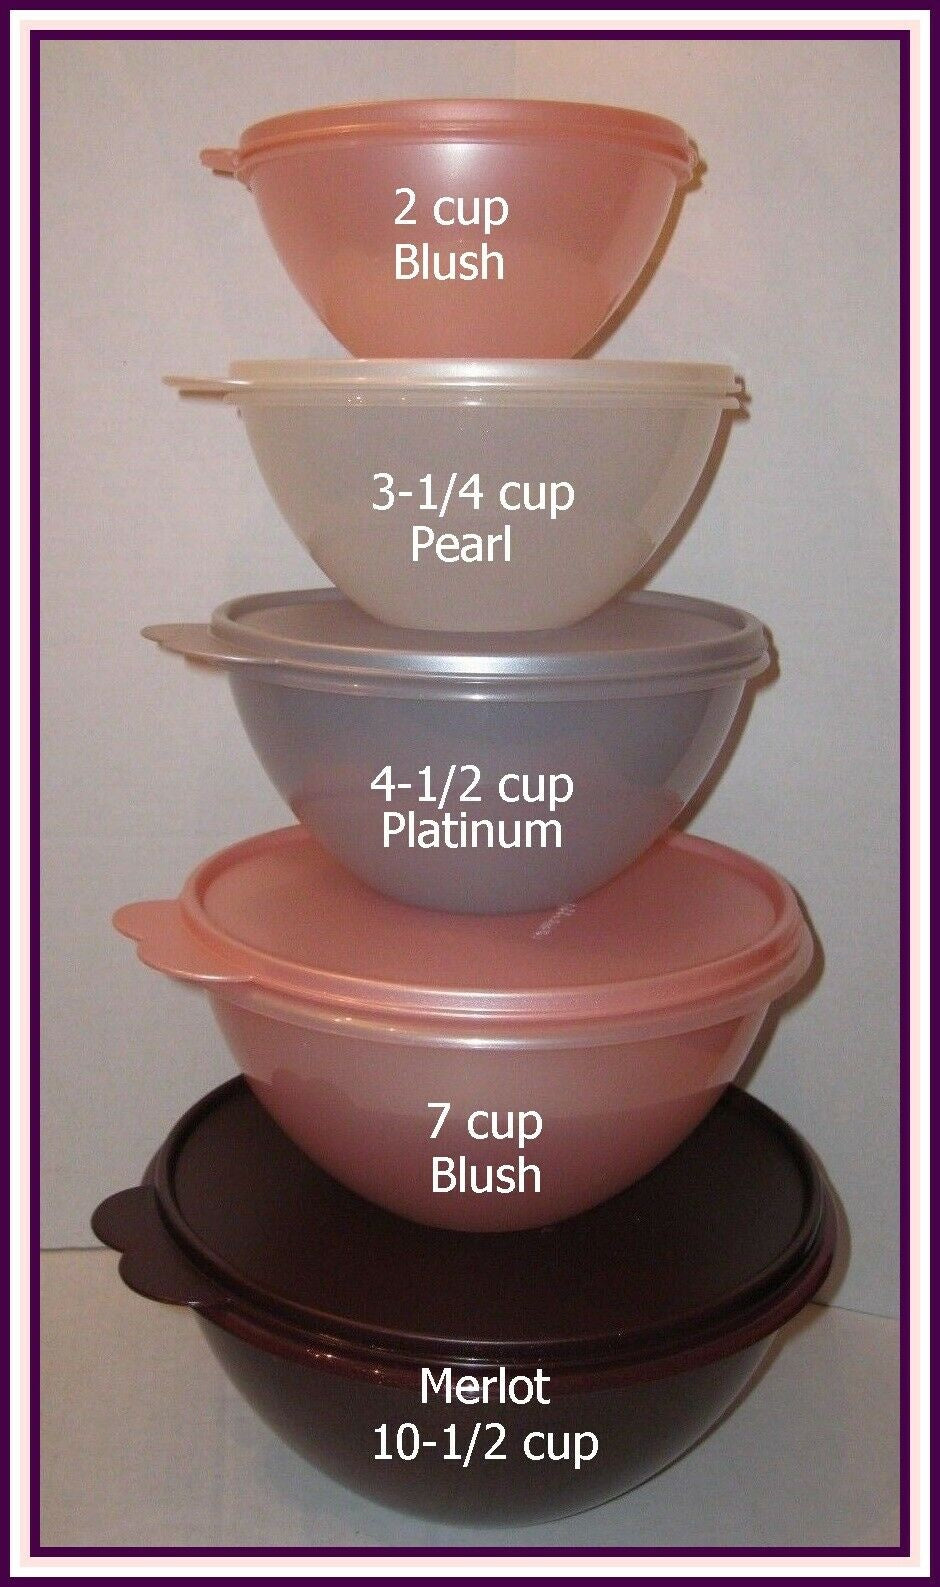 Tupperware 5 WONDERLIER NESTING BOWLS SPARKLING CELEBRATIONS COLORS & SIZES NEW - Plastic Glass and Wax